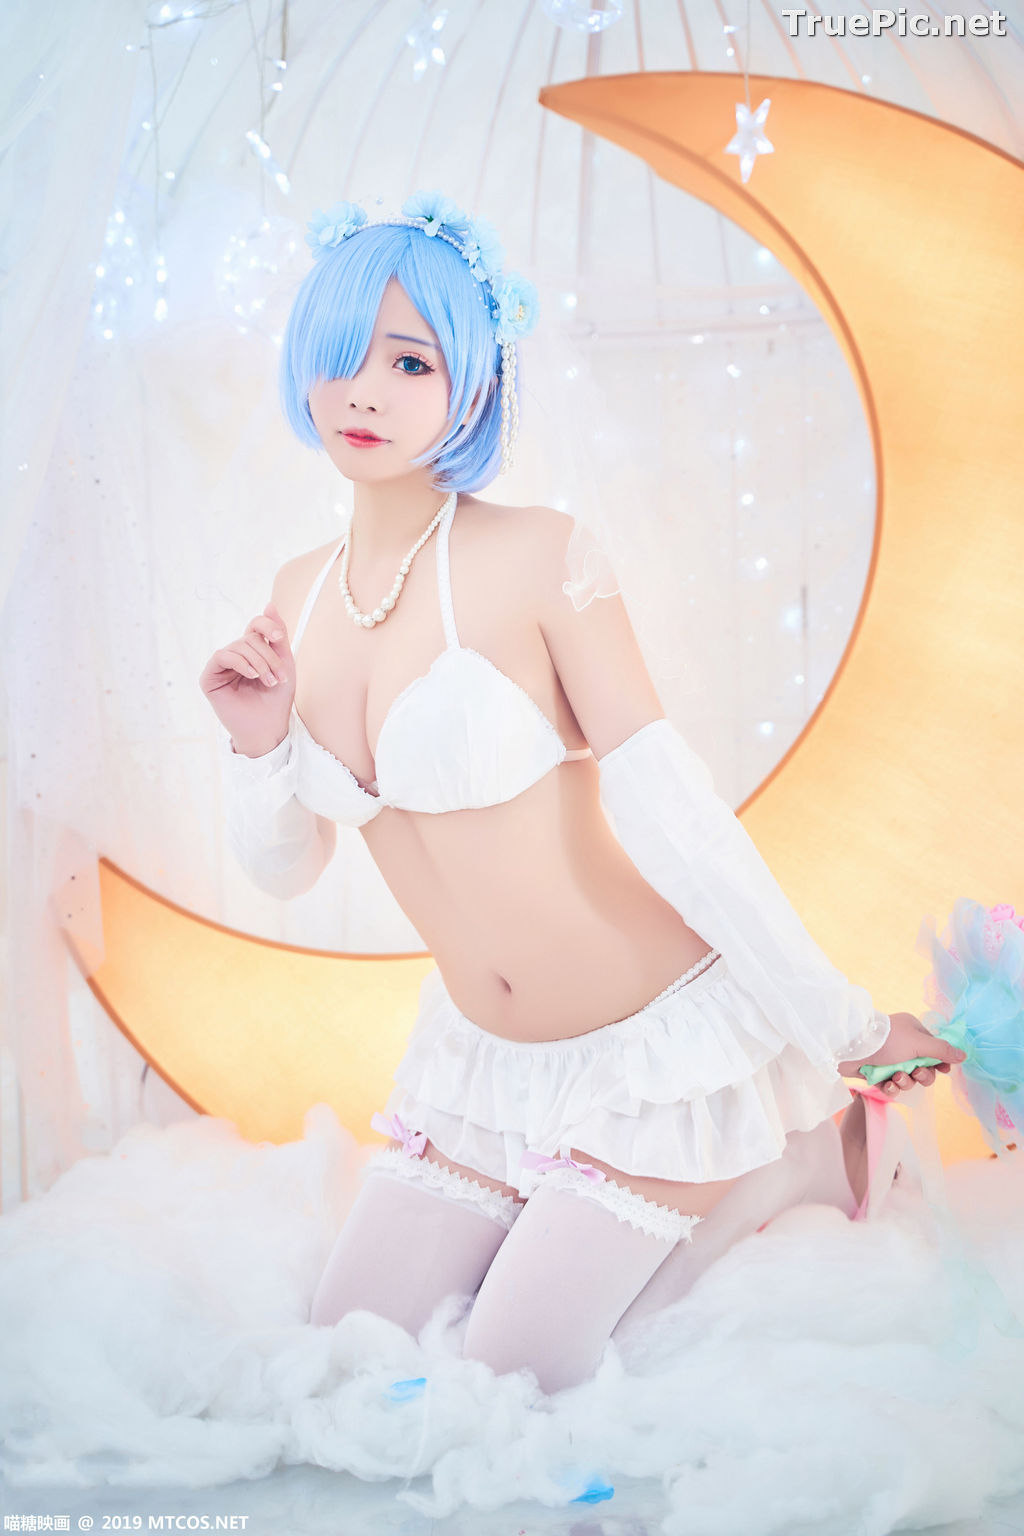 Image [MTCos] 喵糖映画 Vol.043 – Chinese Cute Model – Sexy Rem Cosplay - TruePic.net - Picture-8